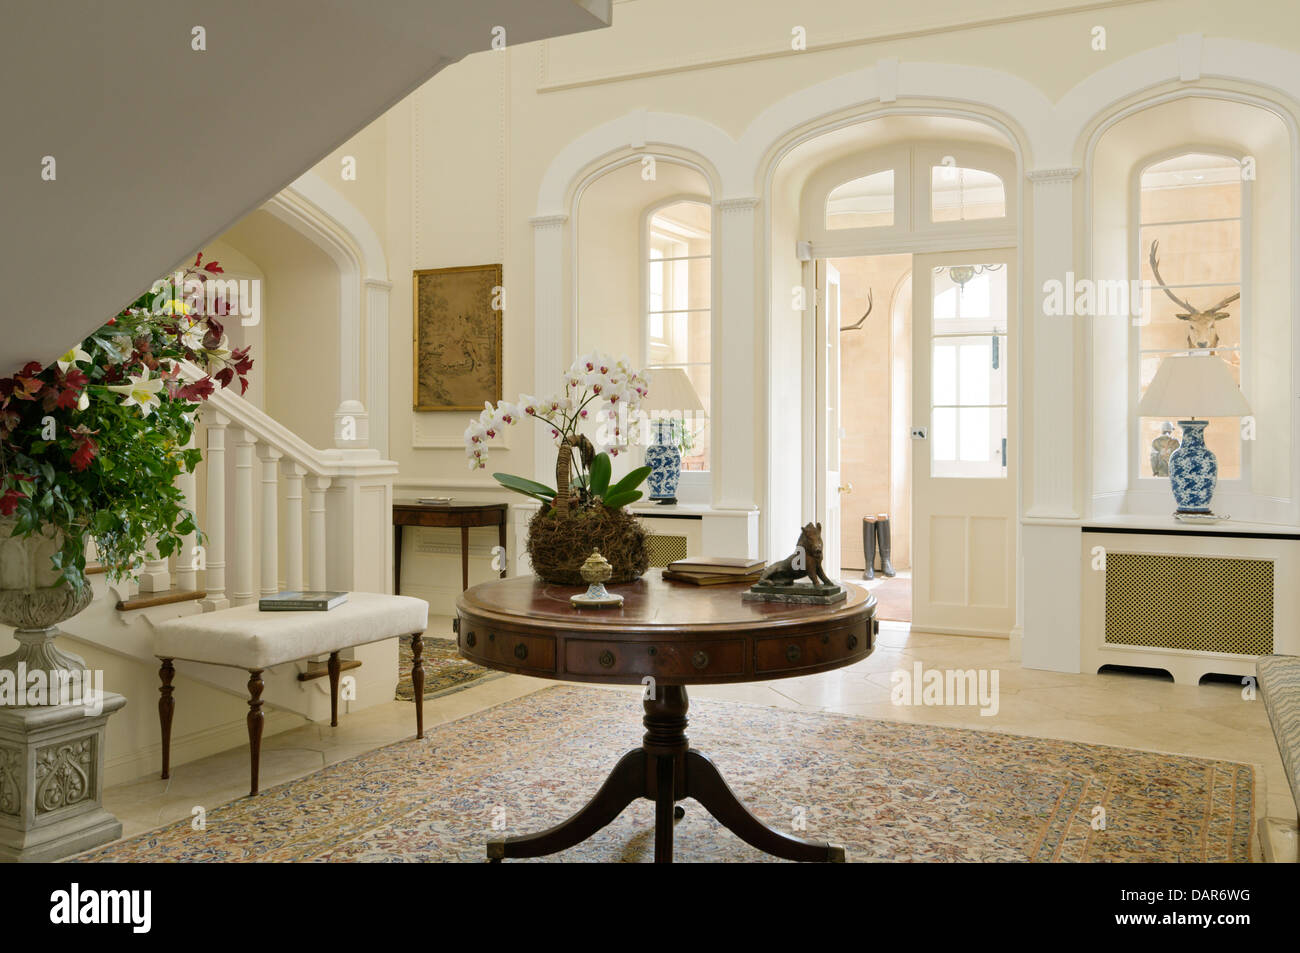 Antique round table in entrance hall of English country house Ampney Park, 17th century English manor Stock Photo